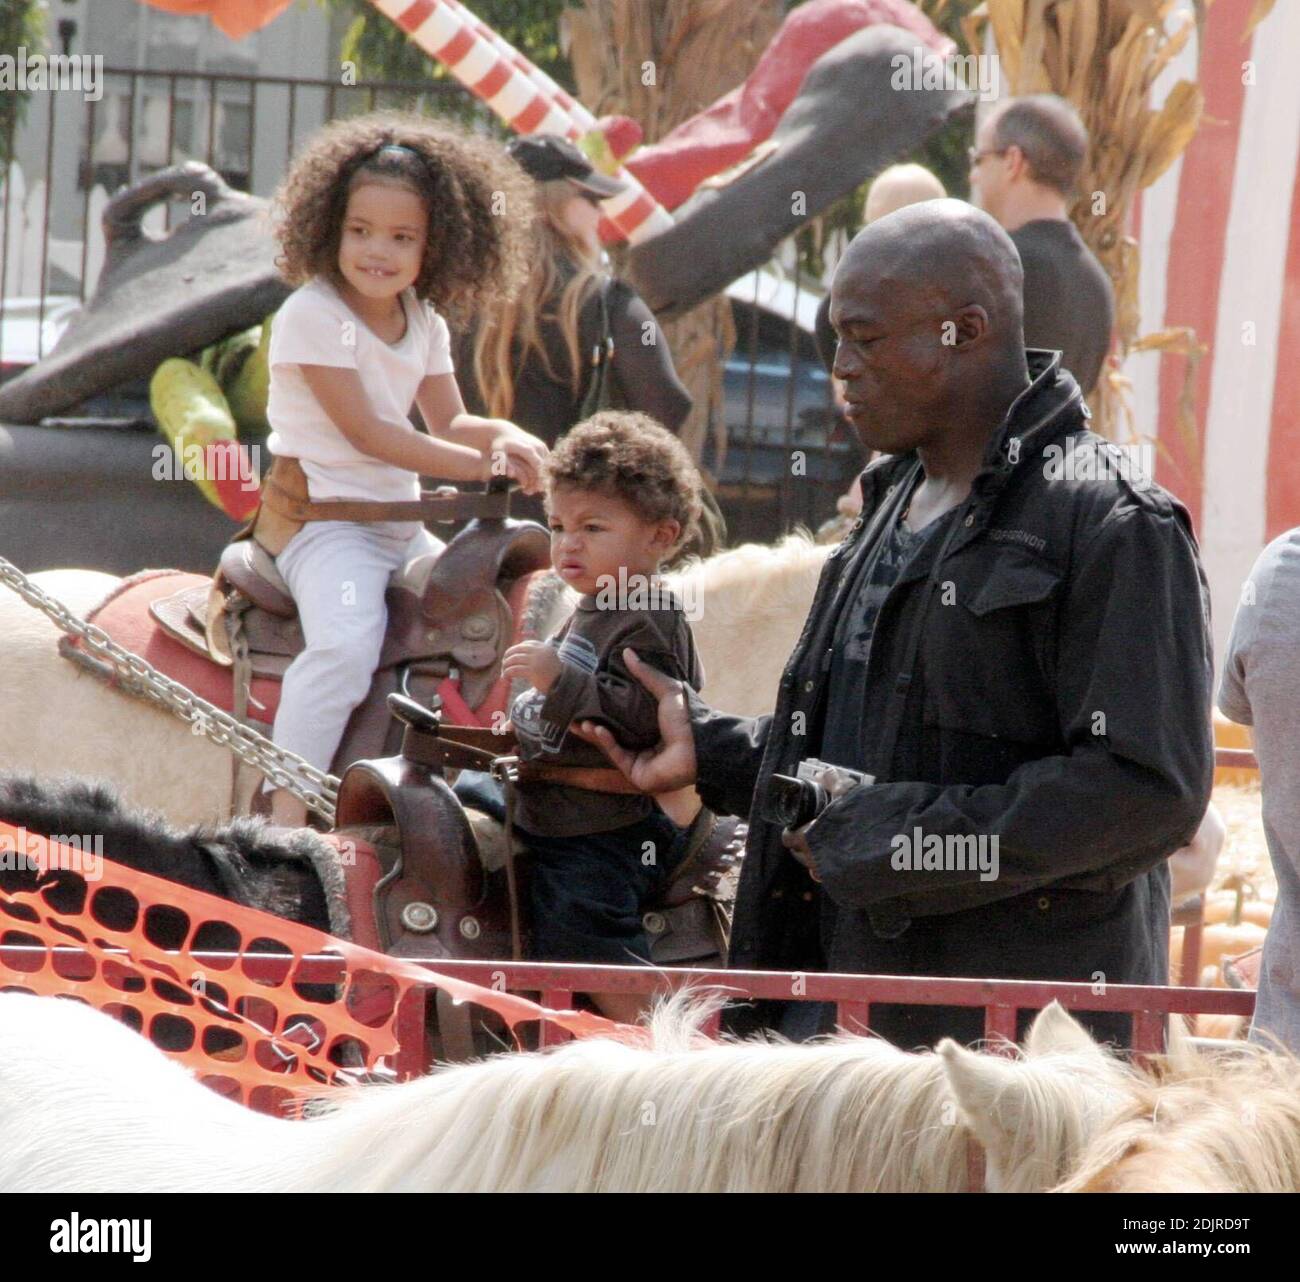 Heidi Klum and Seal take their growing brood to the Pumpkin Patch in West Hollywood, Ca. The children played with skeletons and ran around in a  bouncy pumpkin.  They even took a ride on ponies but the pair refused to get their faces painted. The family spent two hours in the Halloween hotspot before selecting a few pumpkins and heading home. 10/14/06 Stock Photo